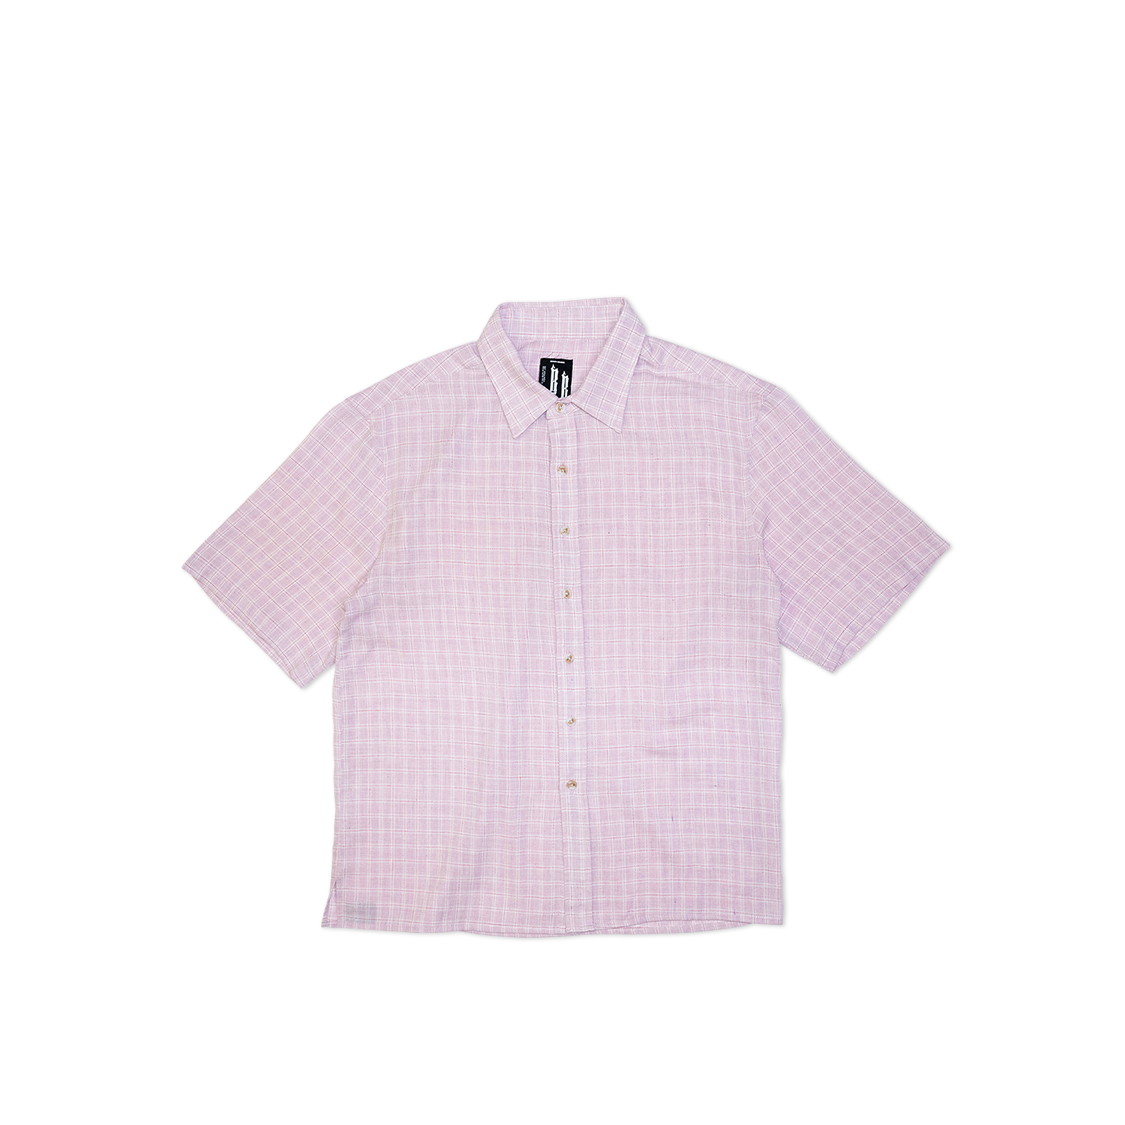 ALL DAY SHIRT - PINK GRID